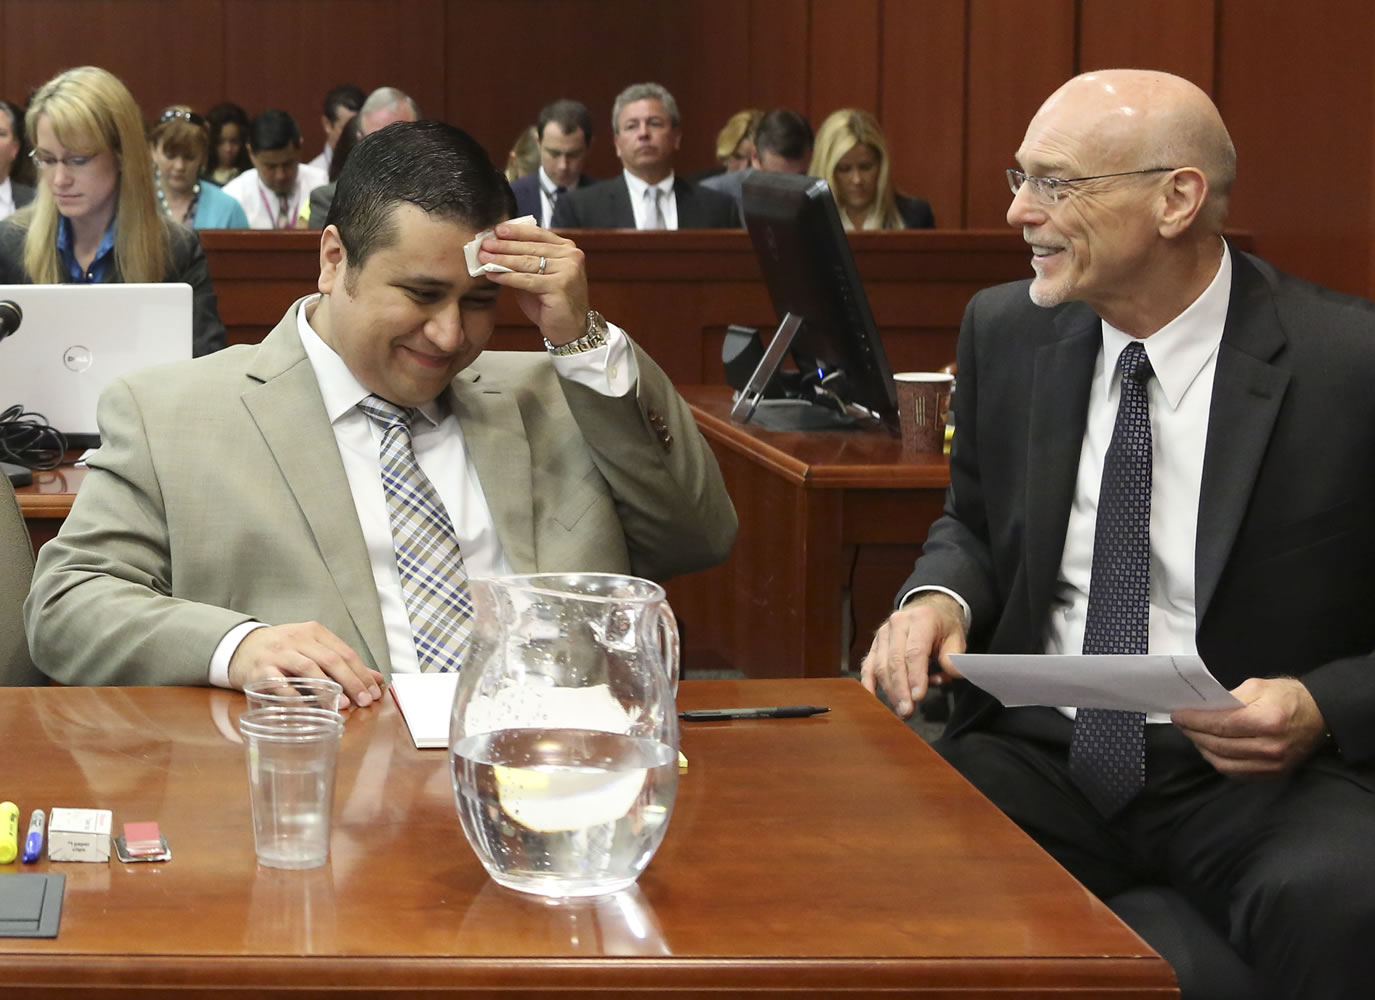 George Zimmerman, left, laughs with his attorney Don West during his trial in Seminole County circuit court in Sanford, Fla., on Tuesday.